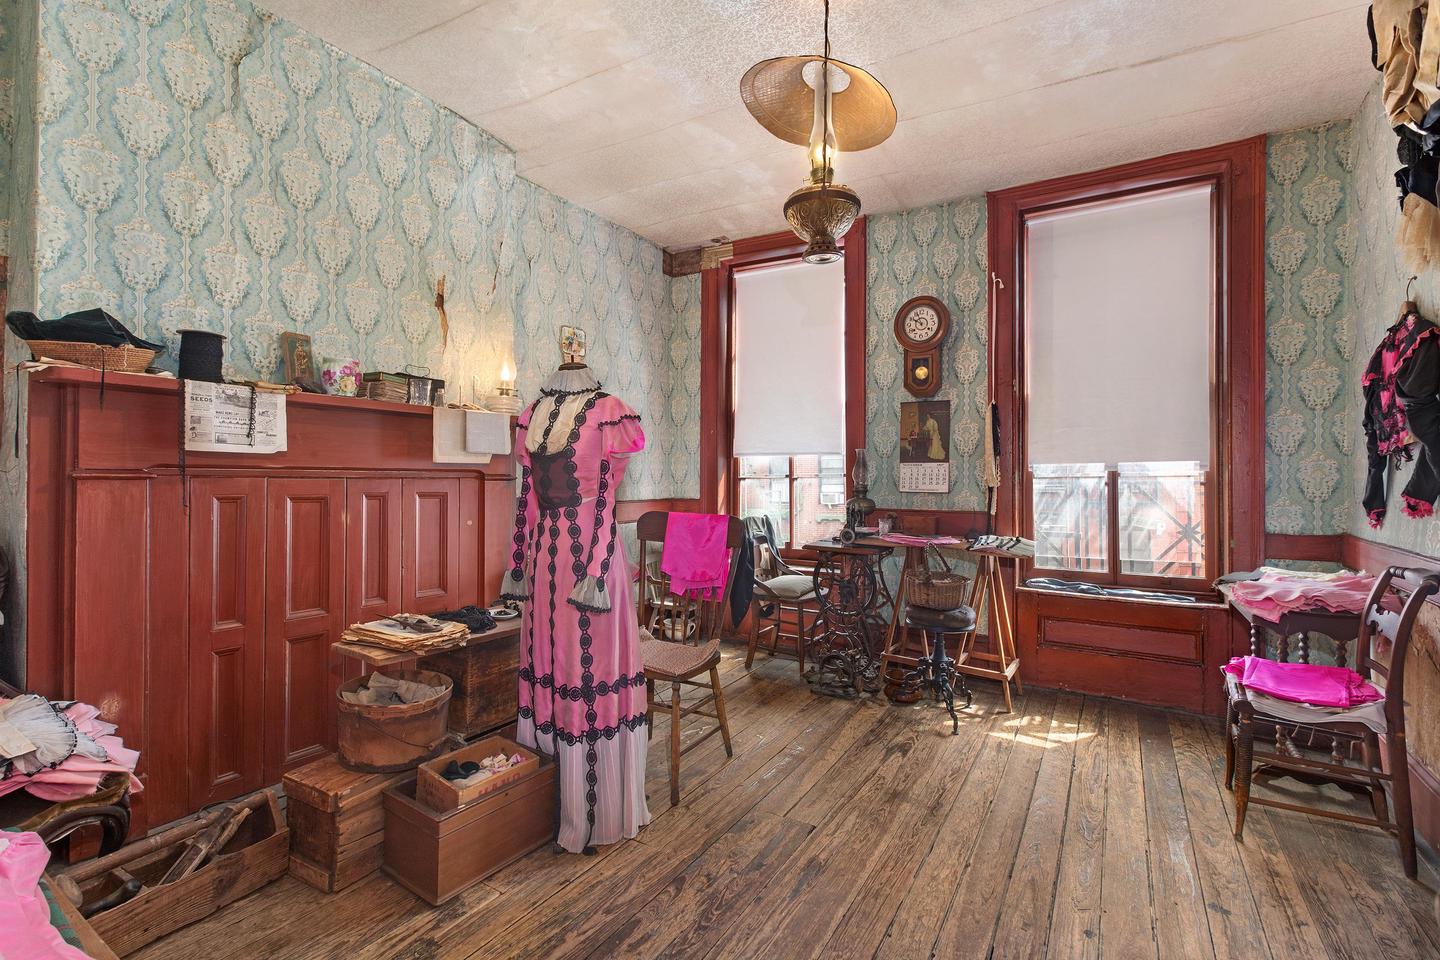 Parlor at the Lower East Side Tenement MuseumInside the Levine Parlor